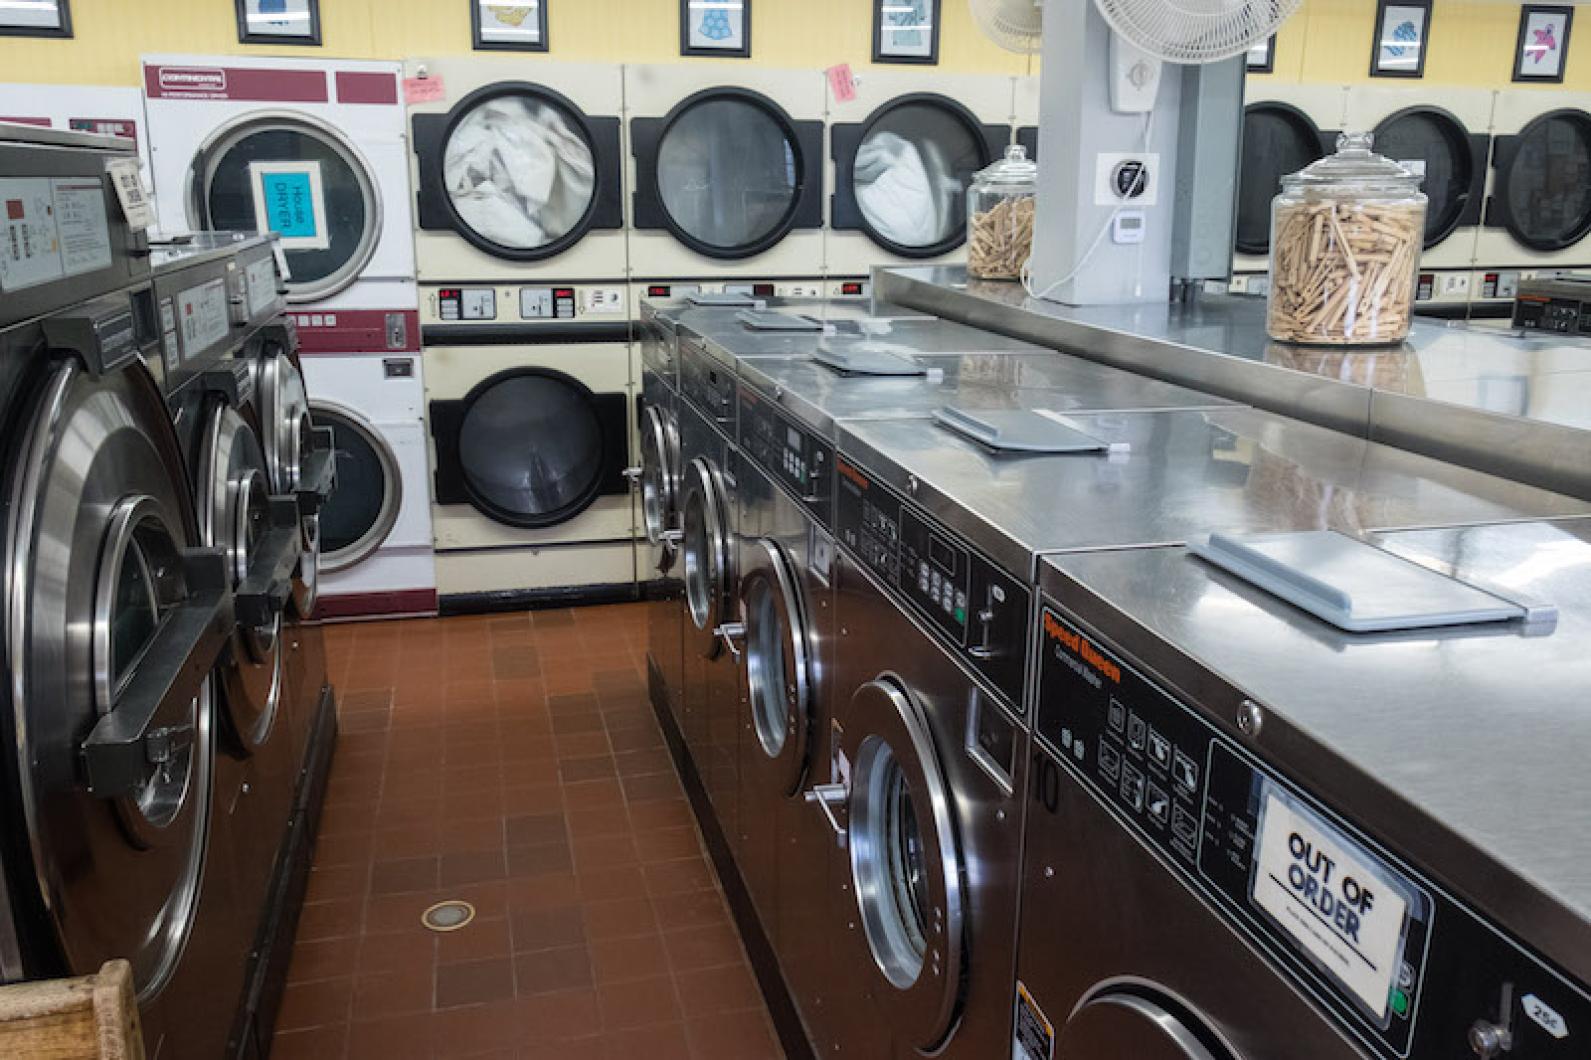 How Many Quarters Were Left in the Evicted Laundromats Washers and Dryers?  